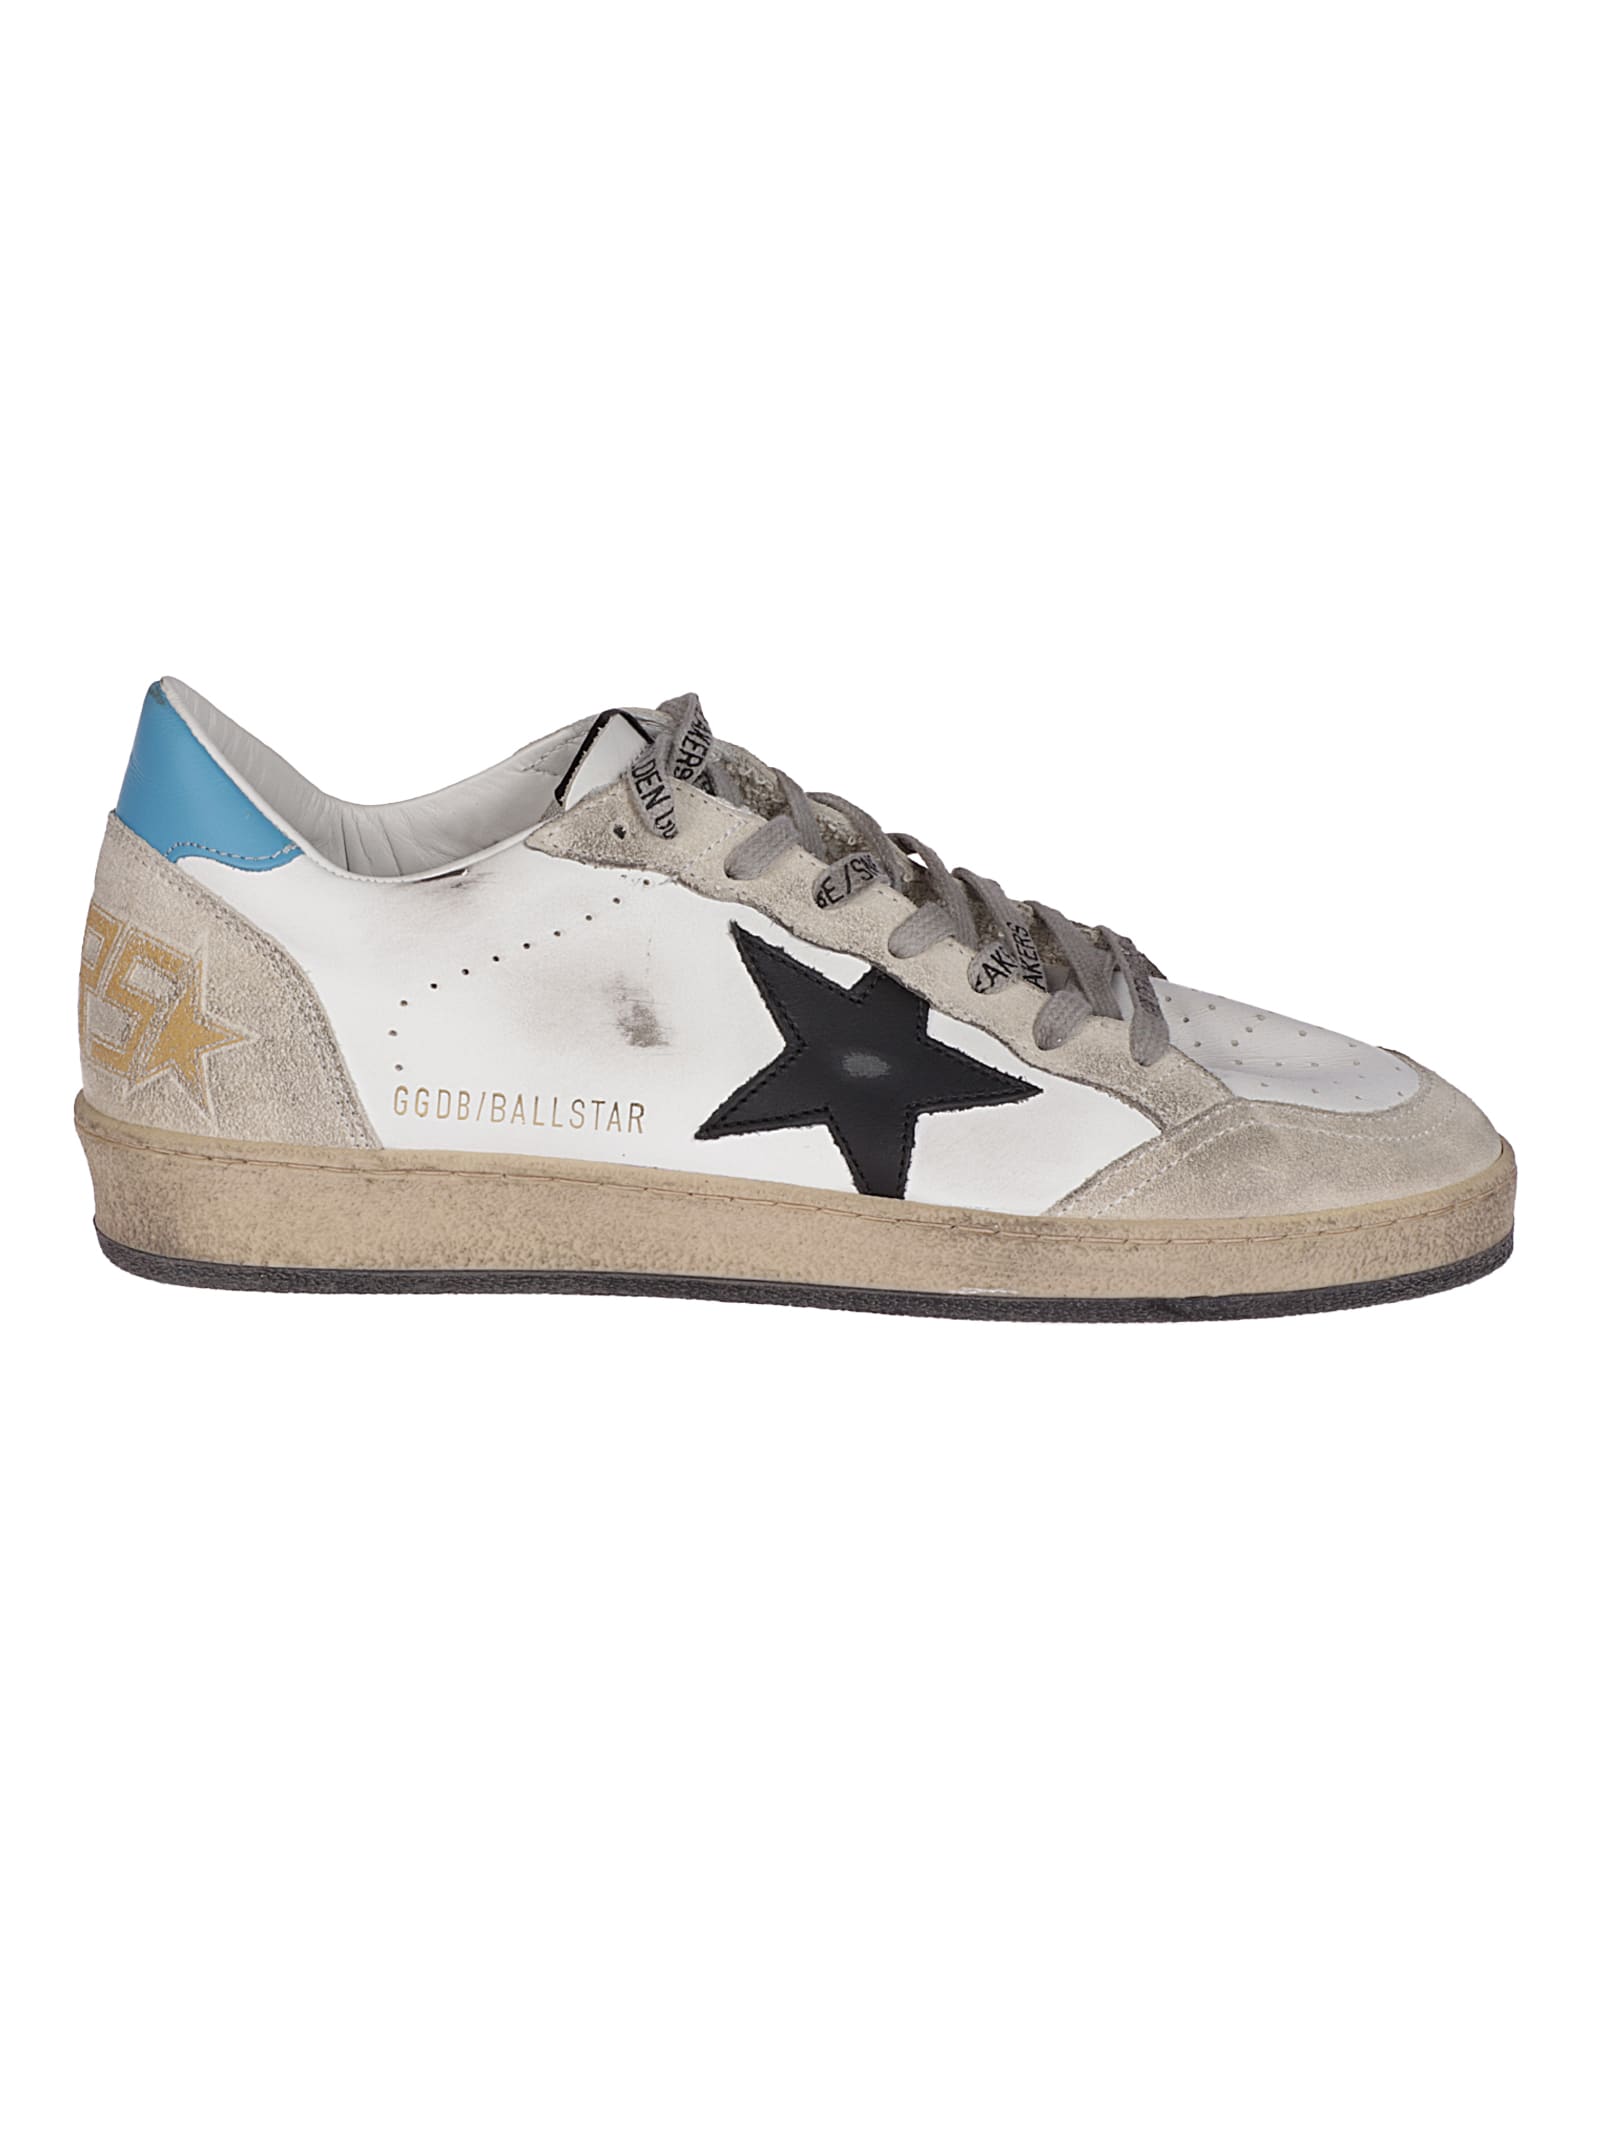 Golden Goose Ballstar Leather Upper And Star Suede Toe And Spur